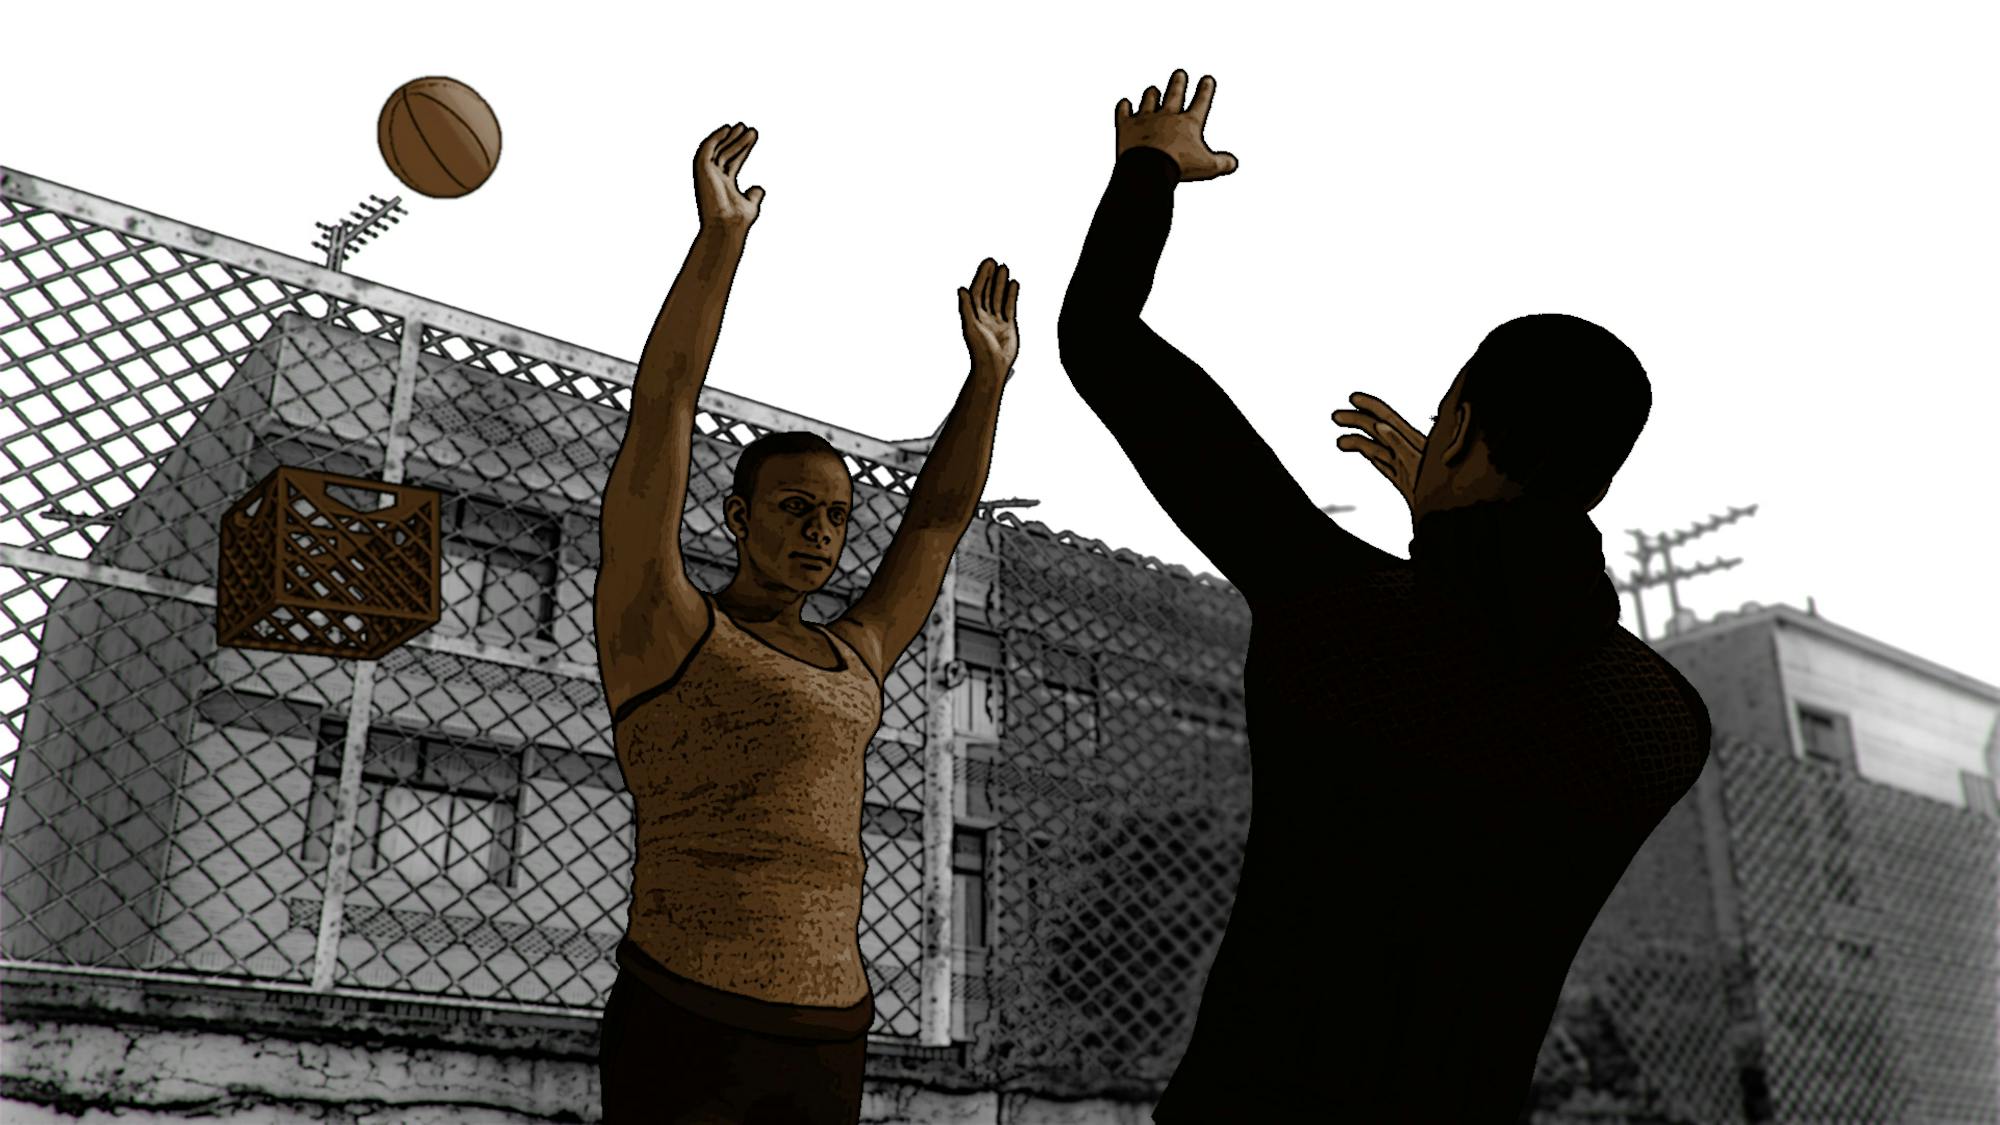 An animation by James A. Sims shows two Black individuals playing basketball, using a milk crate as a hoop. In the film, the animation accompanies narration: “I want to go back to when we used milk crates for basketball hoops, when hands up don’t shoot was for b-boys blocking jumpshots.”